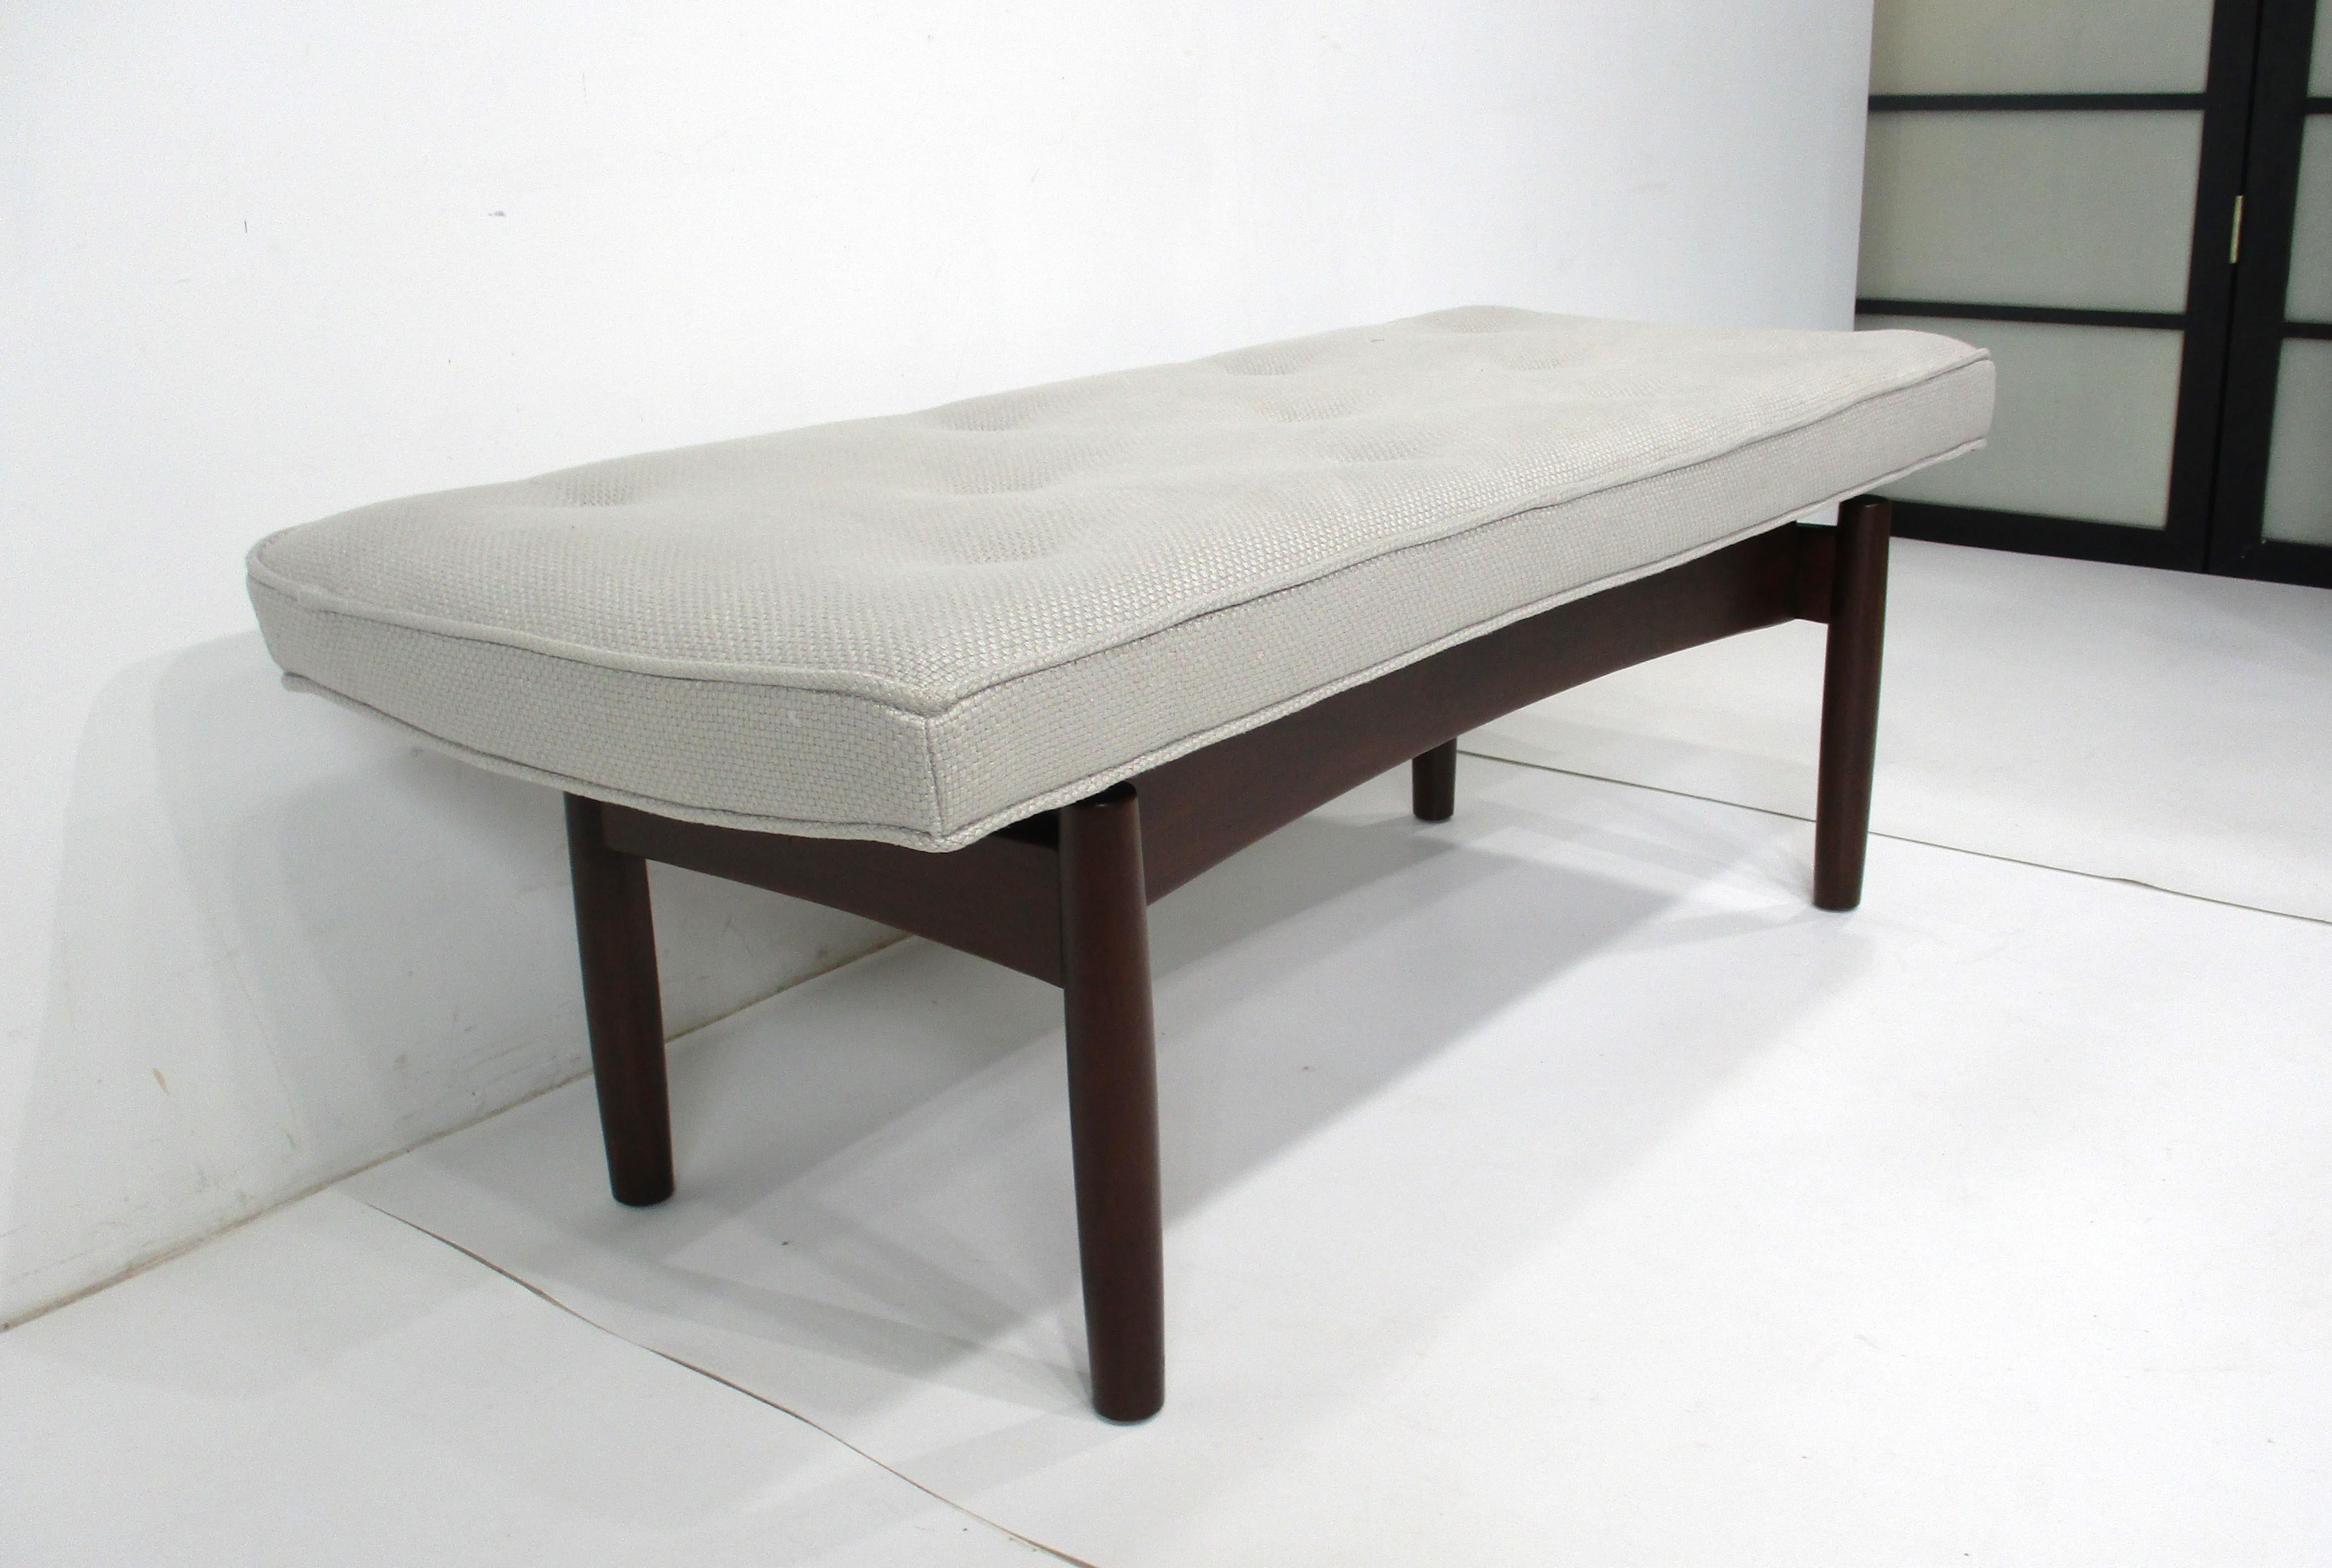 Mid-Century Modern Upholstered Walnut Bench in the Style of Greta Grossman Danish Modern (A) For Sale